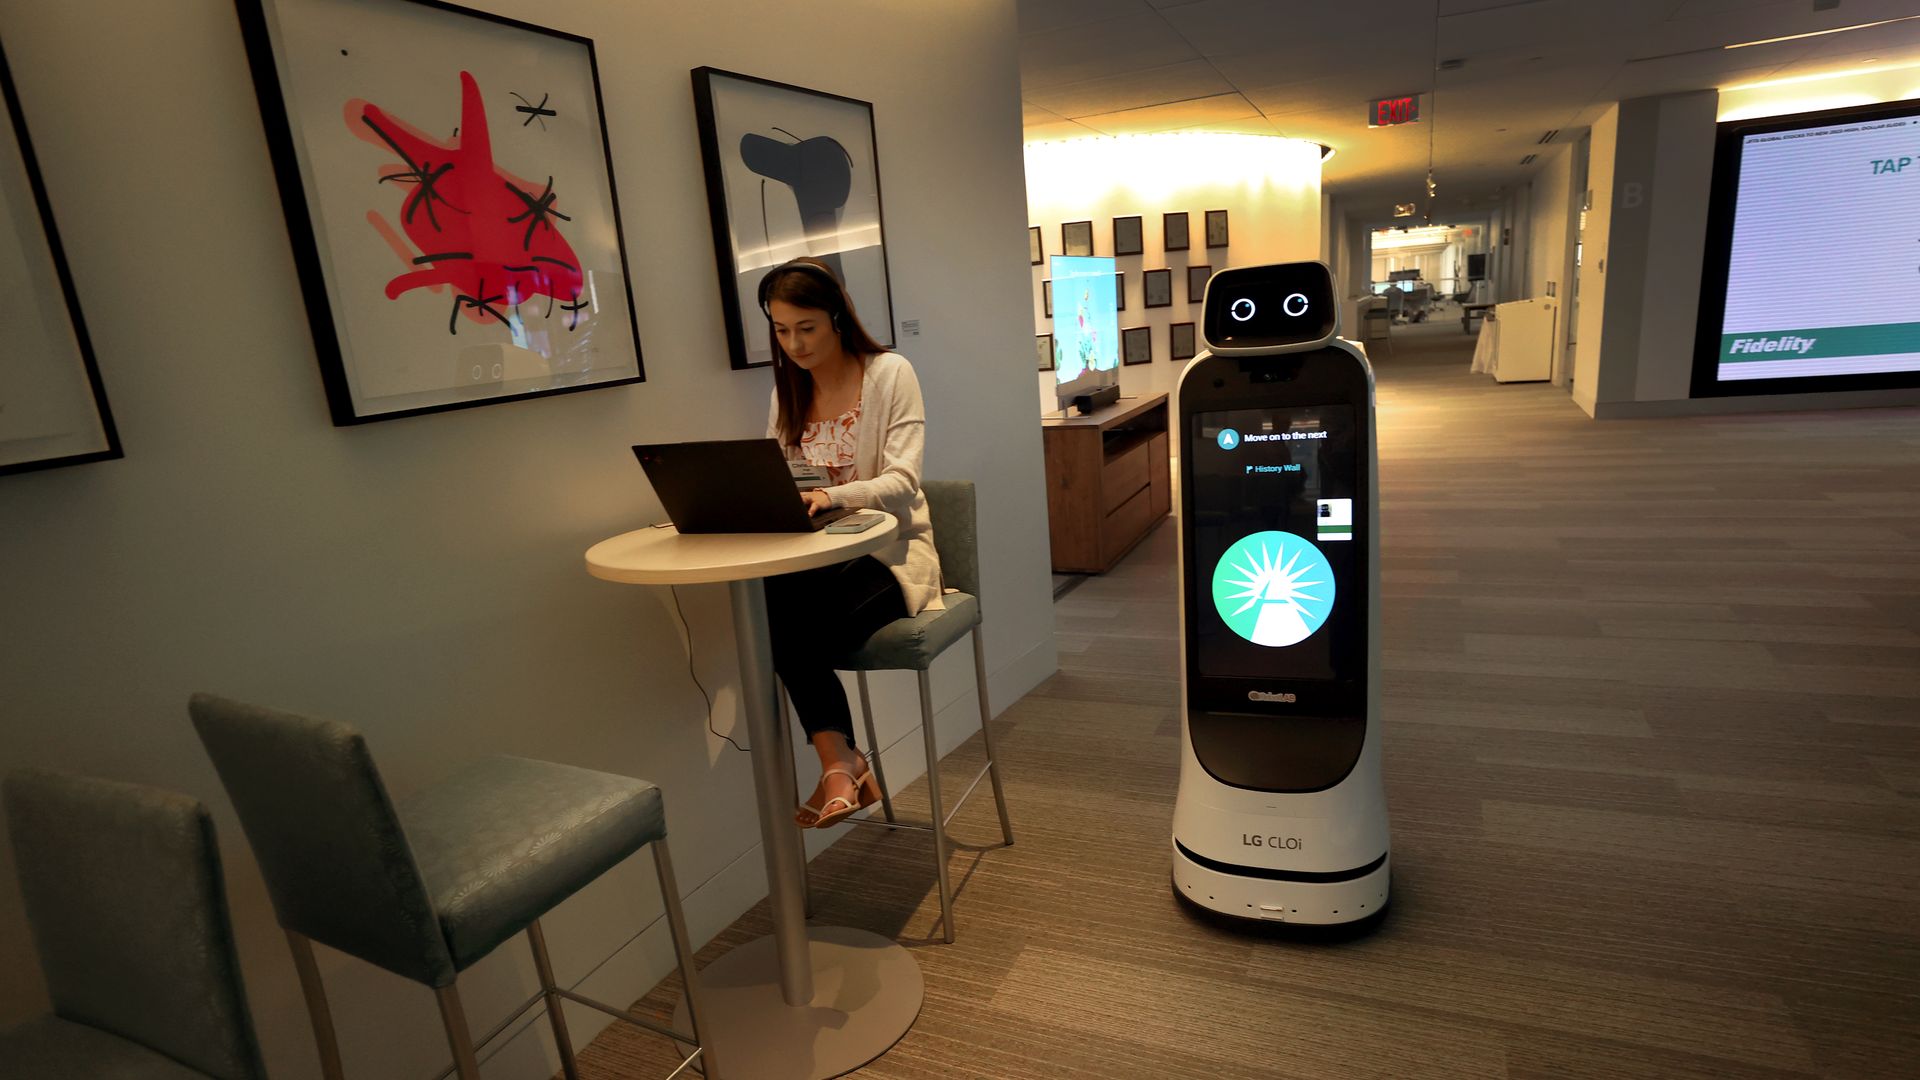 A meandering robot strolls by a woman seated in an office corridor.